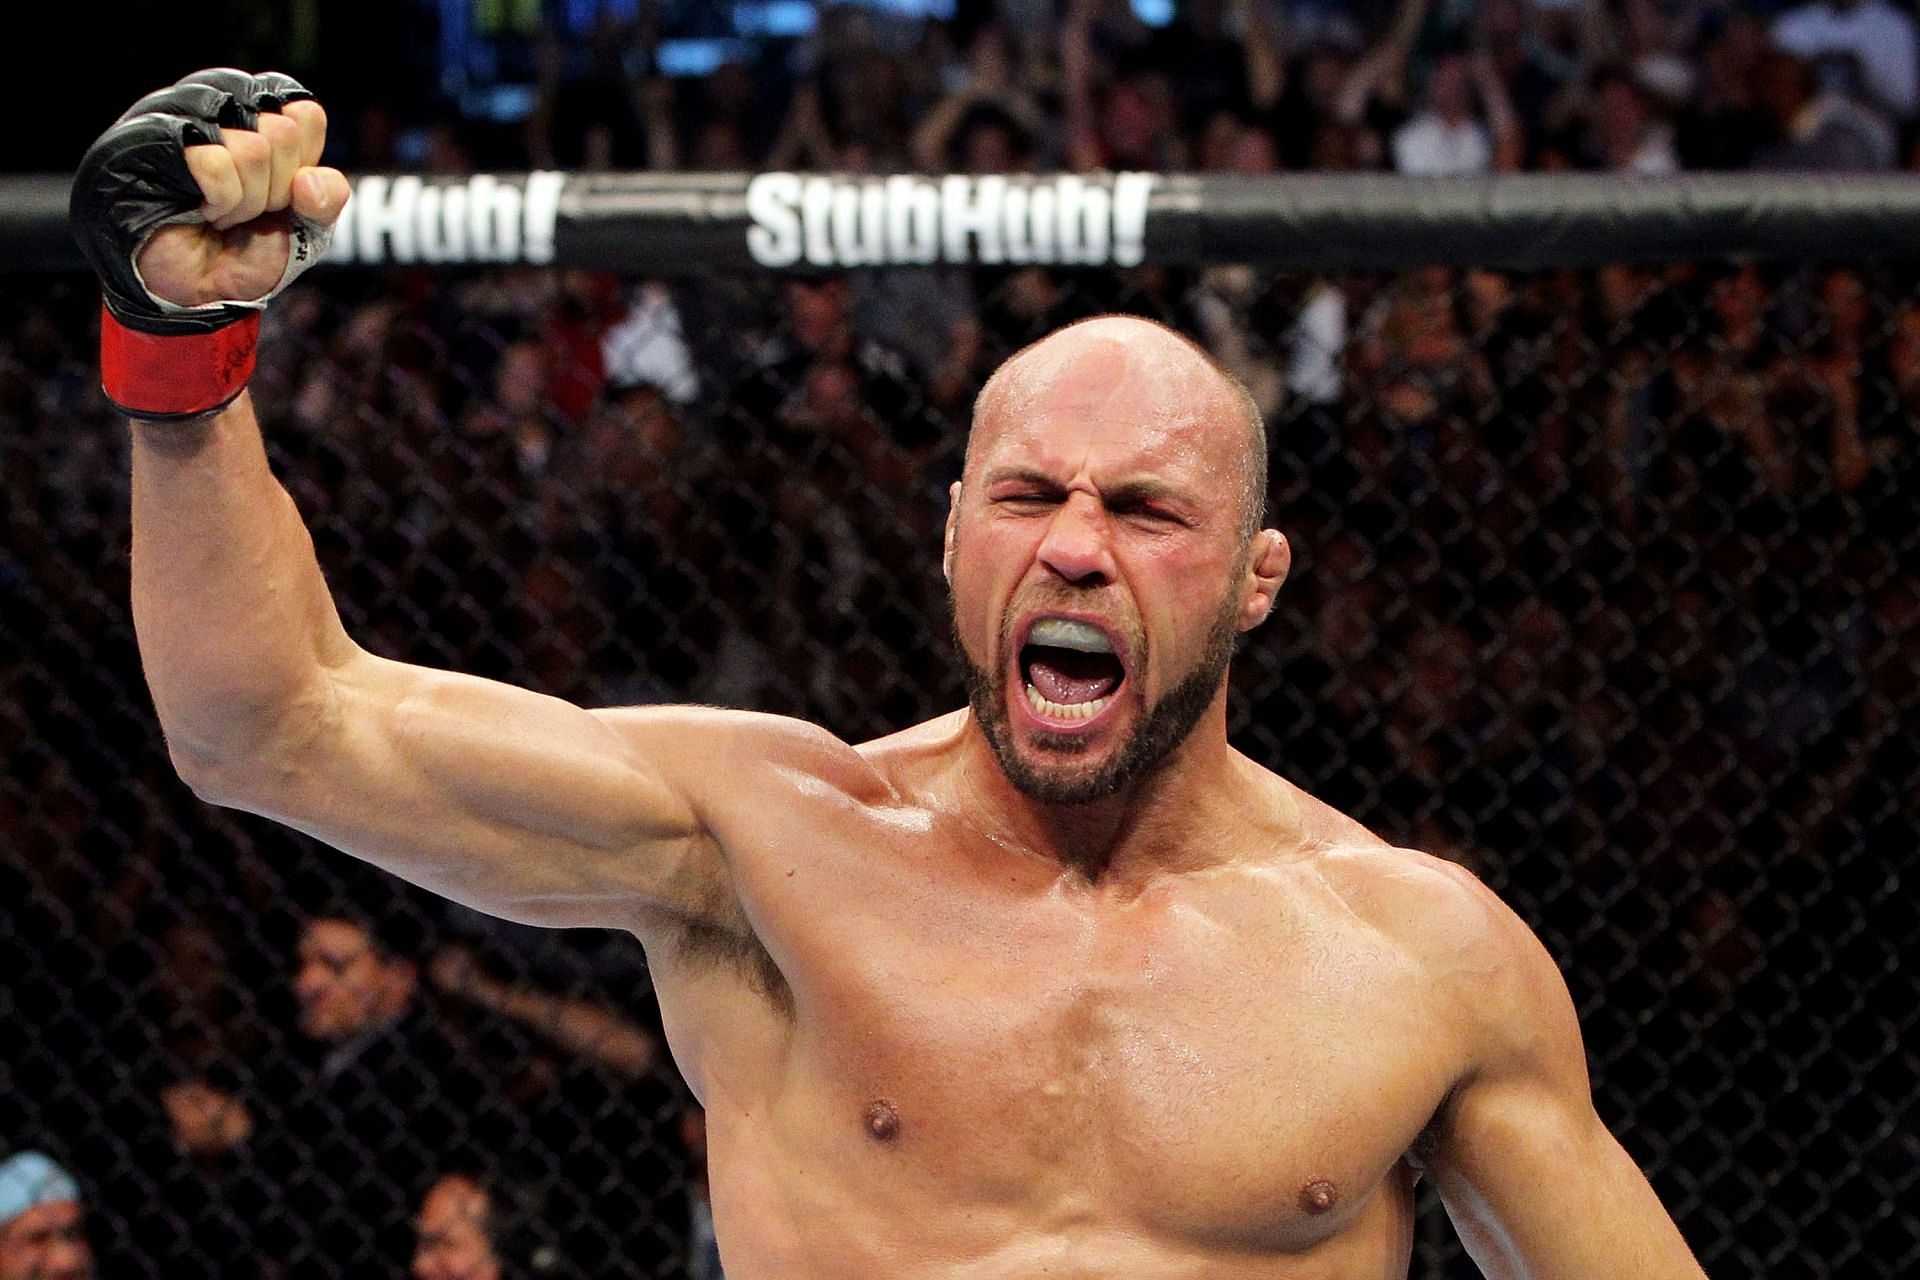 Randy Couture needed just seven months to reclaim his light-heavyweight title from Vitor Belfort